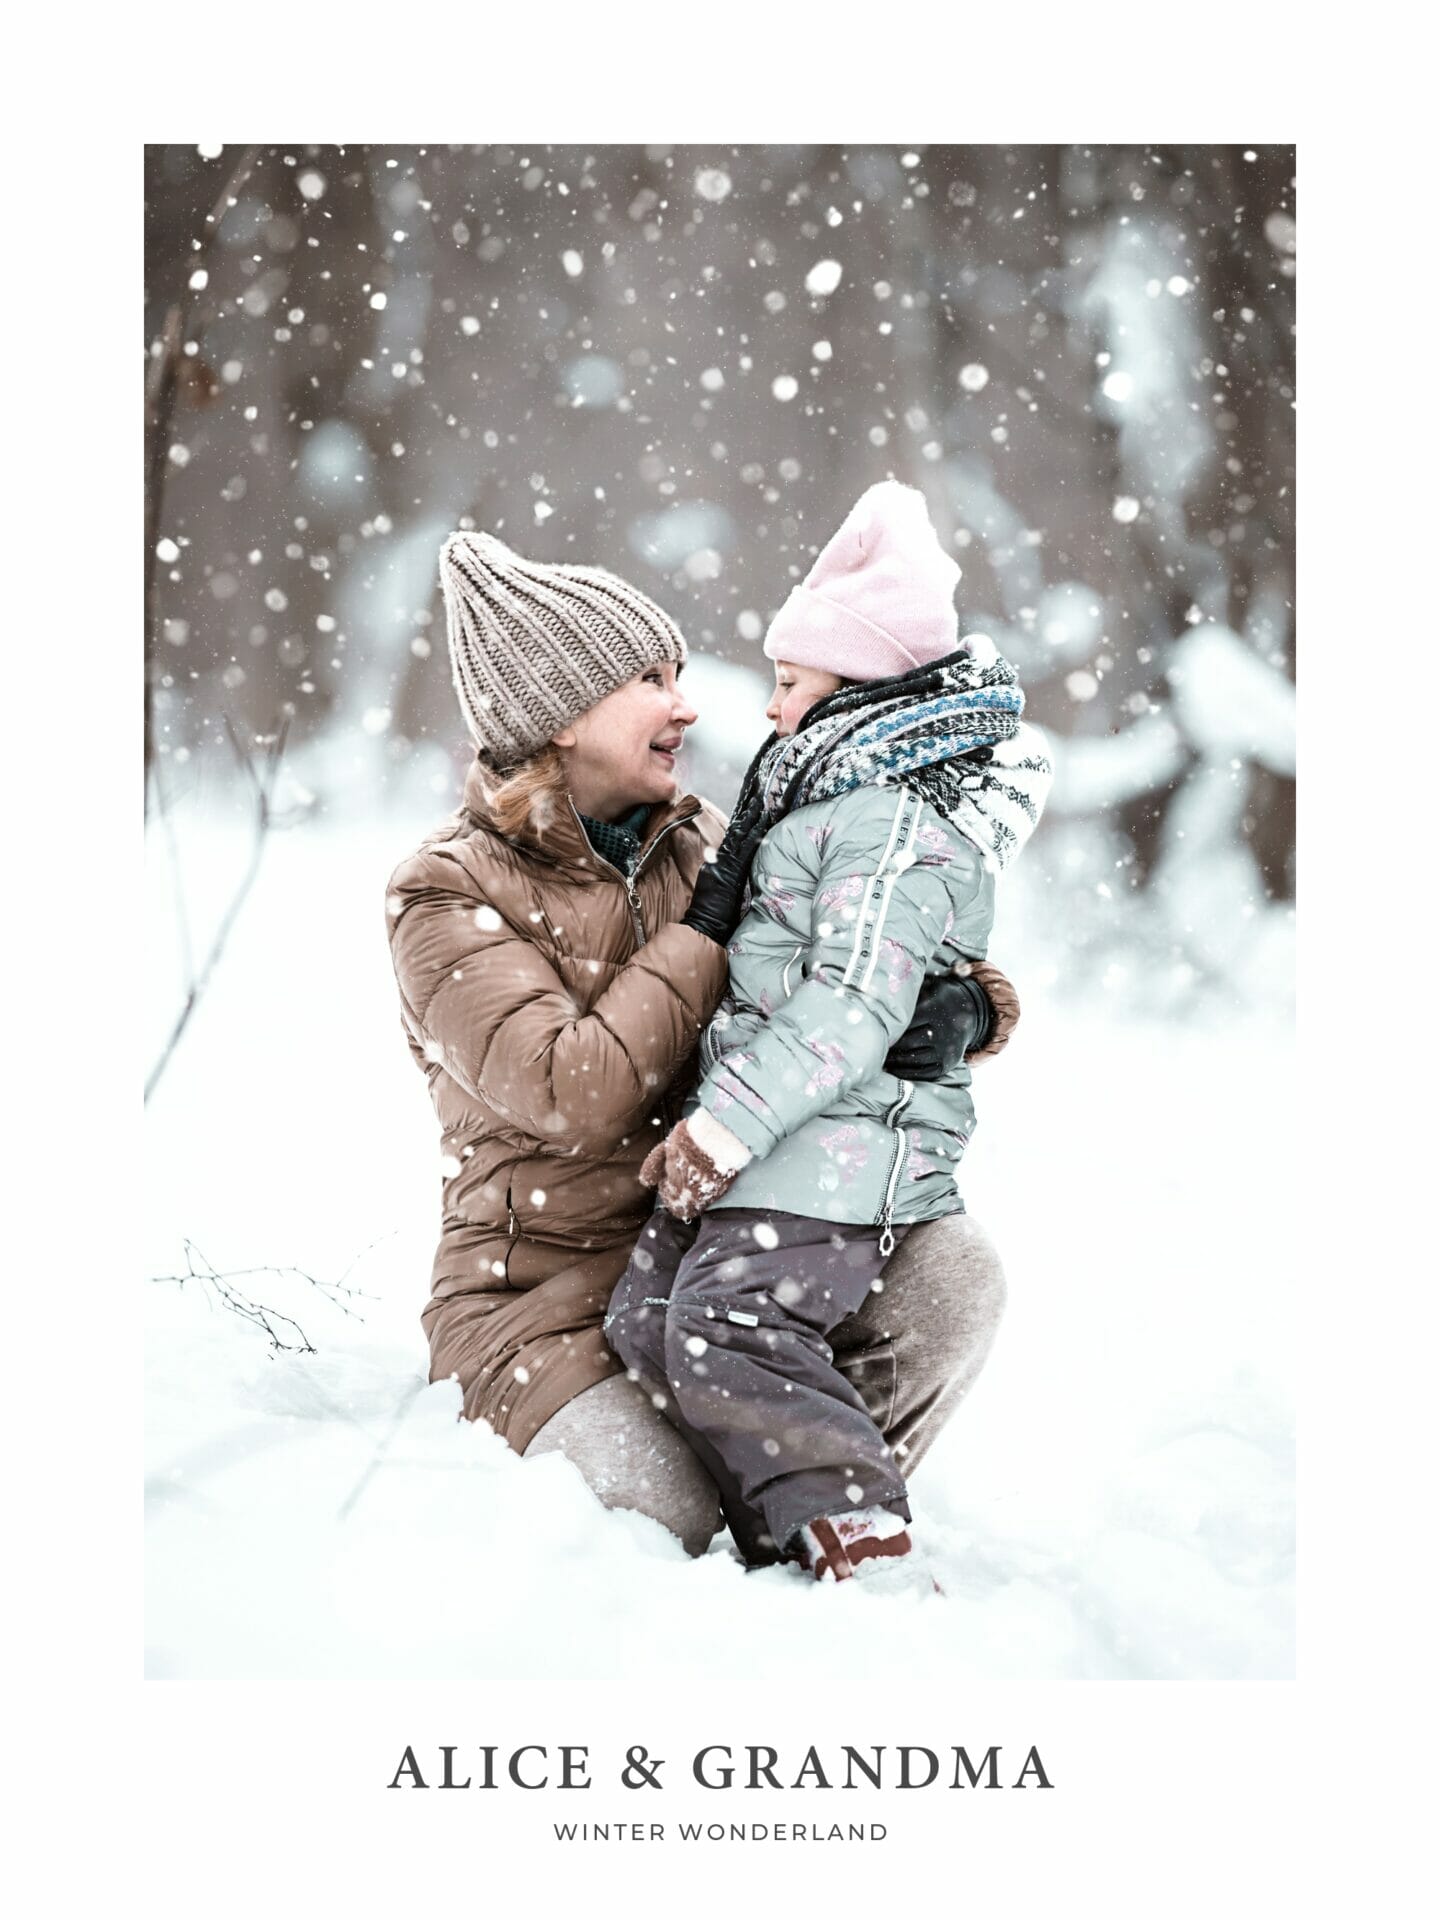 Poster of girl and grandma in snow